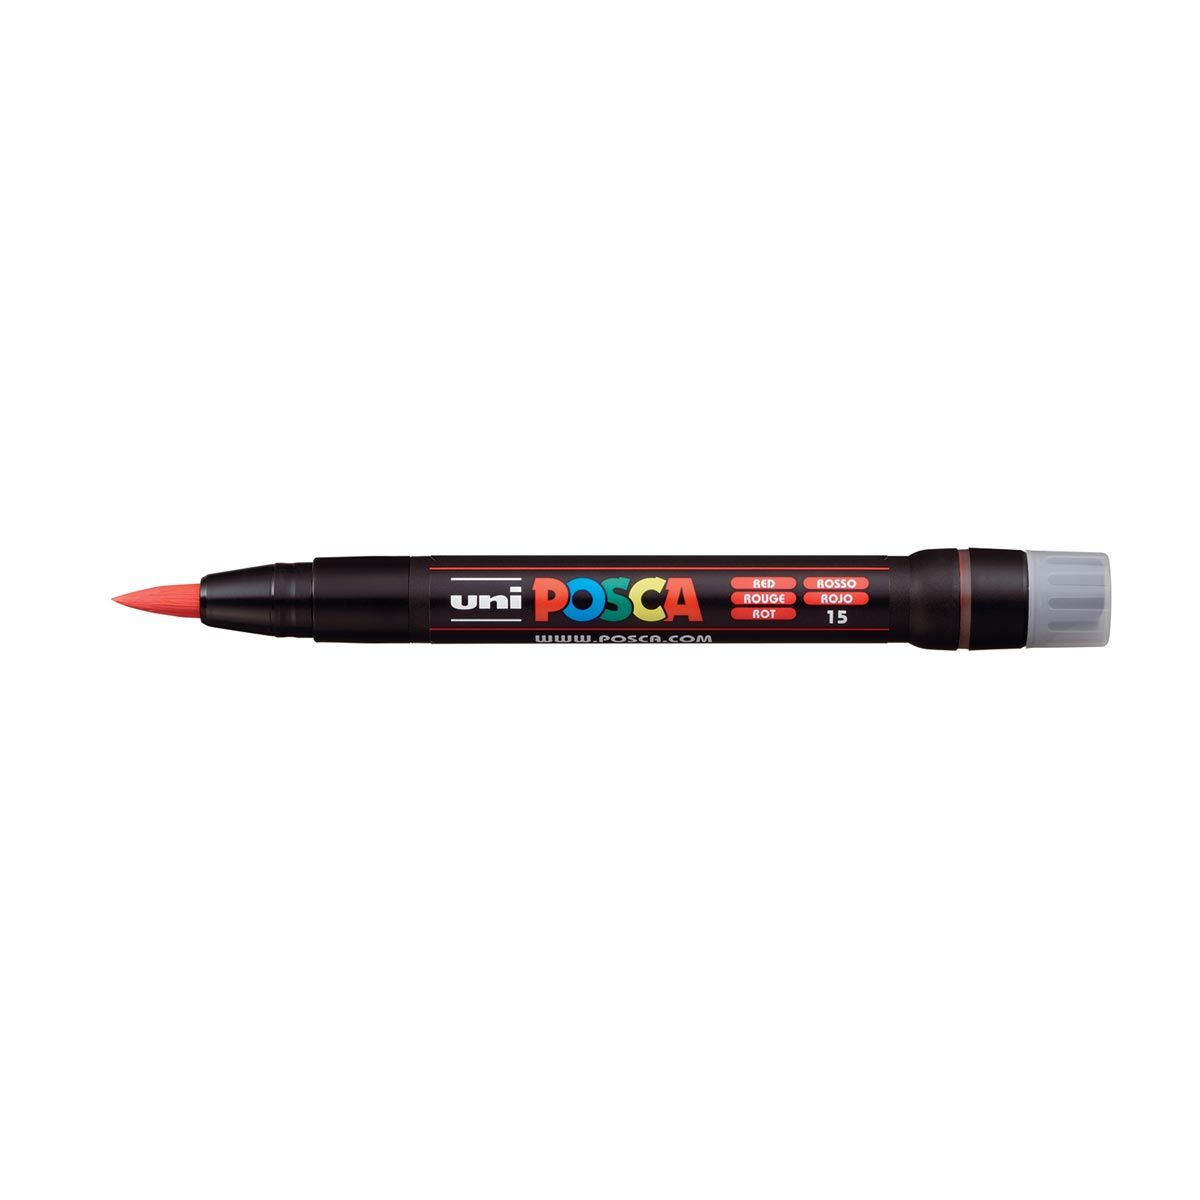 UNI POSCA PCF-350 Brush Tipped Marker Pen – Red